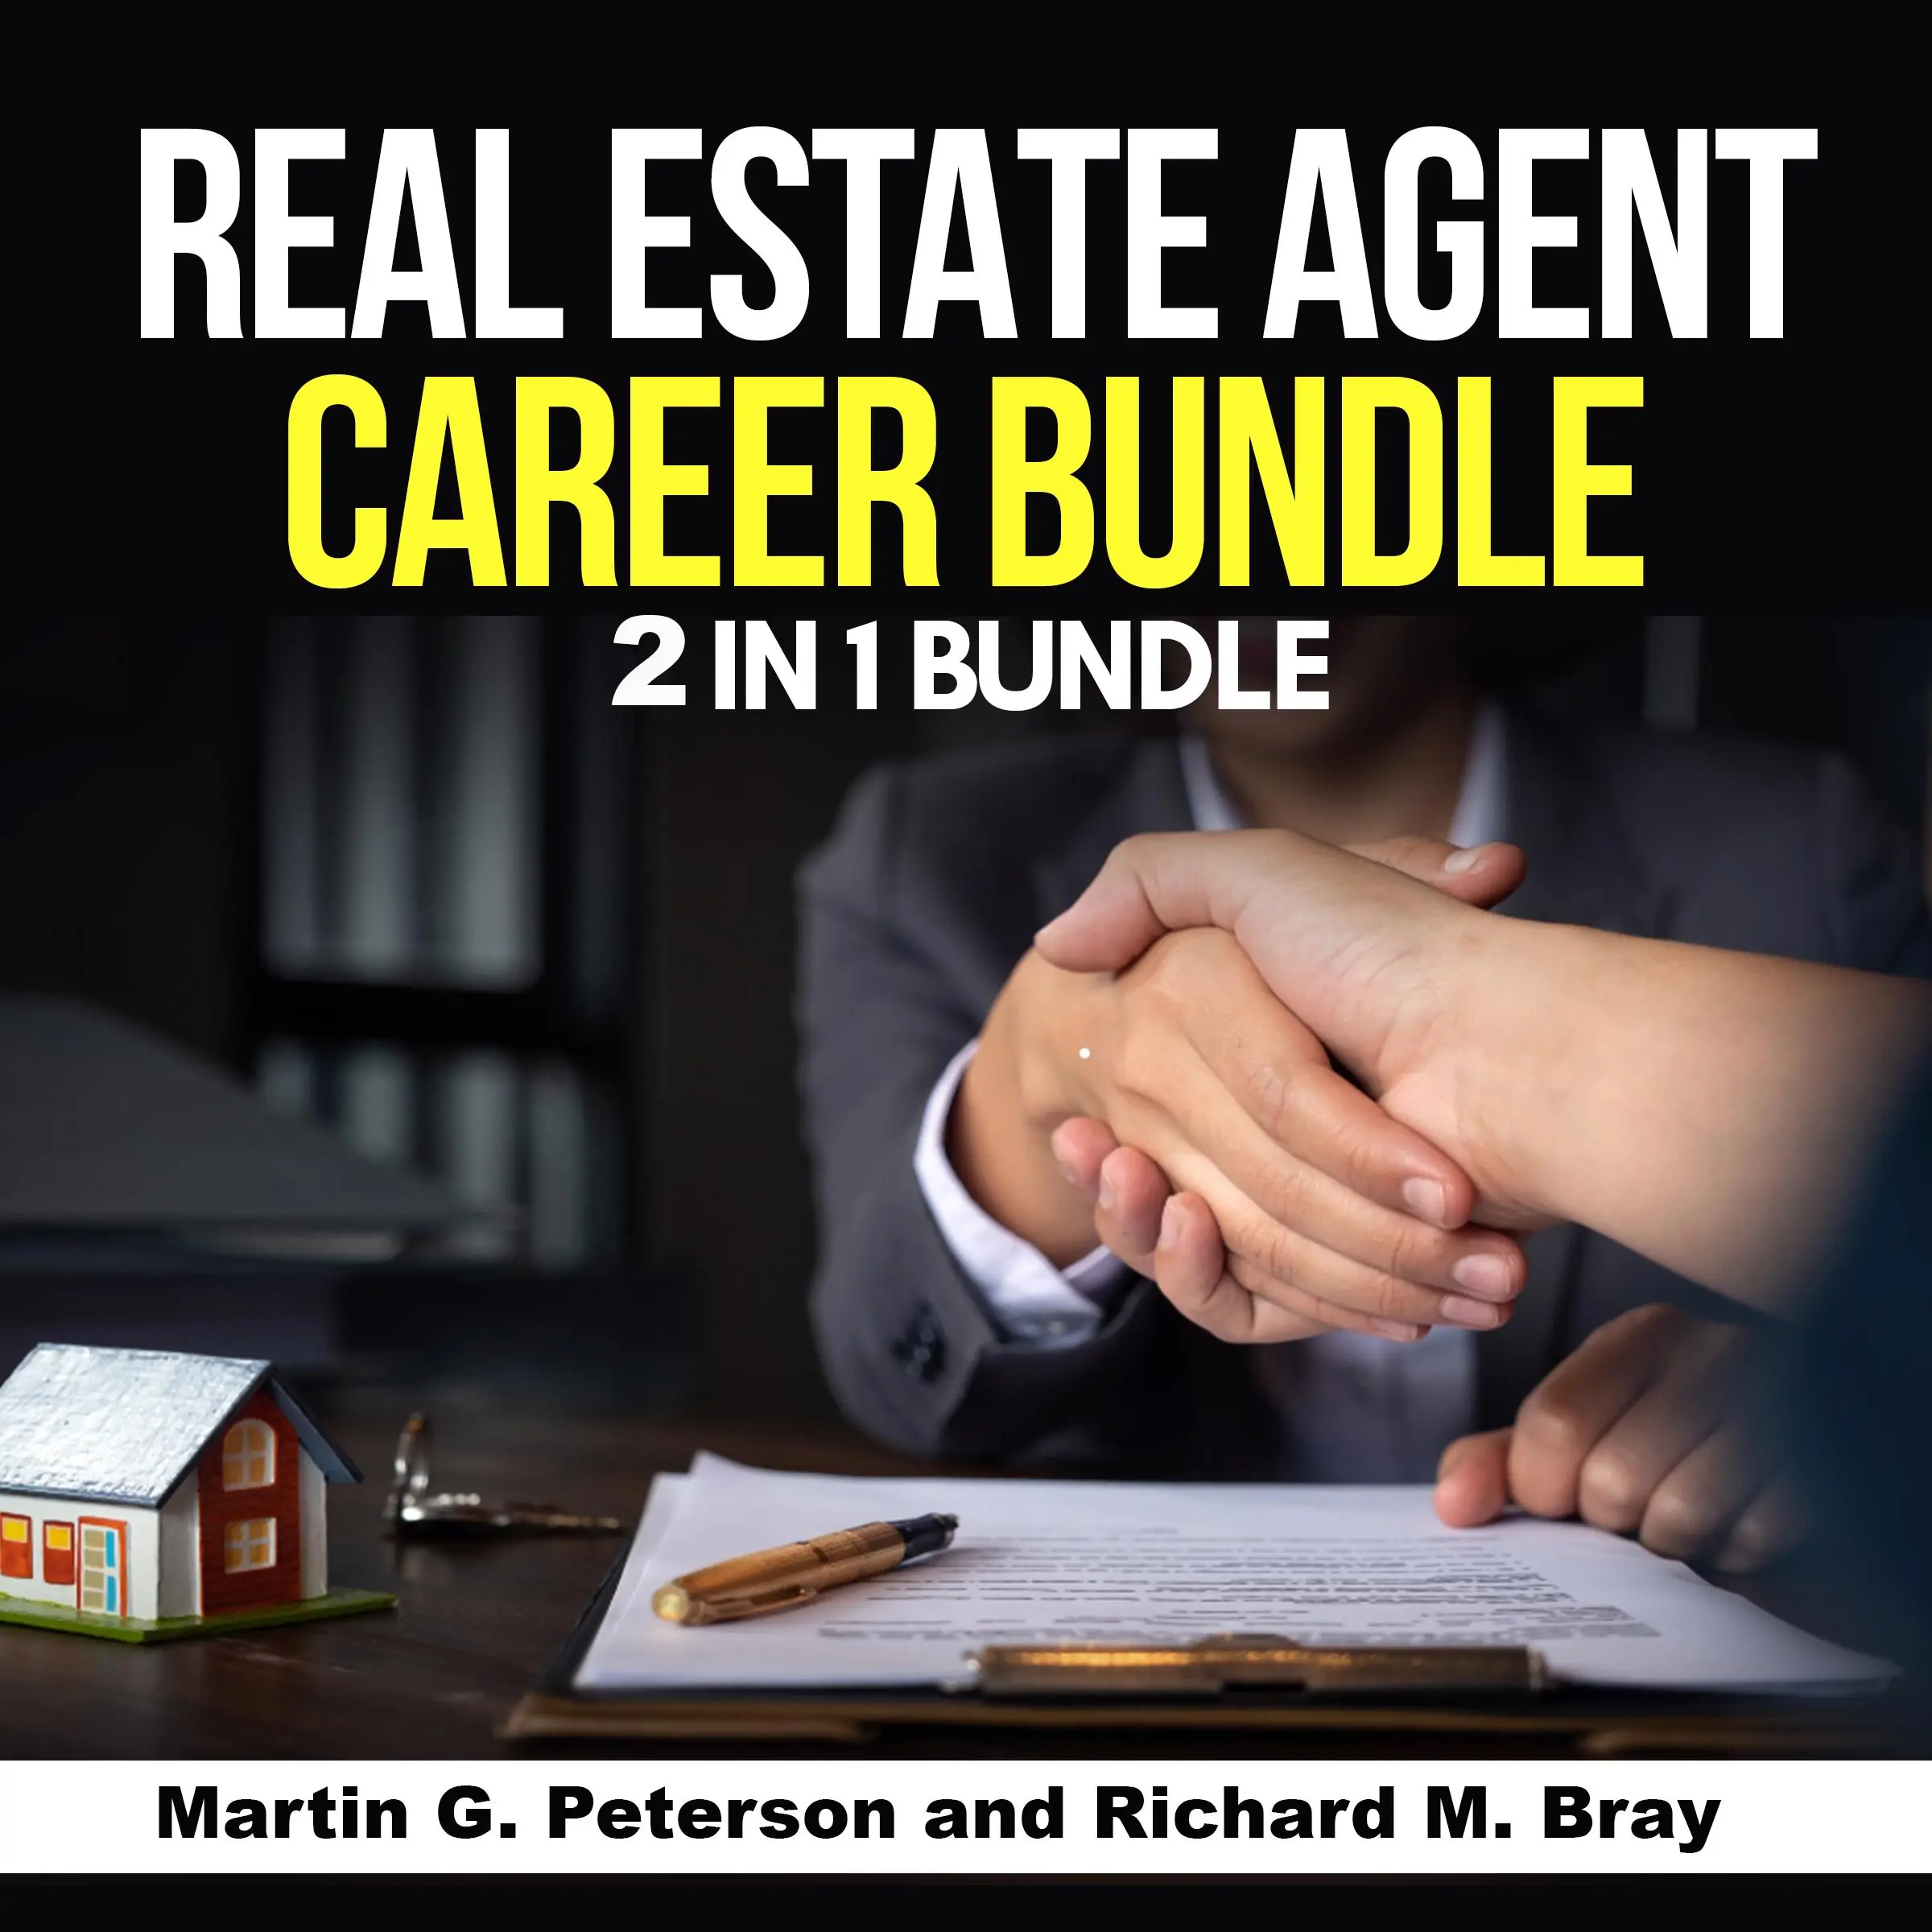 Real Estate Agent Career Bundle: 2 in 1 Bundle, Real Estate Agent, Sales Audiobook by Martin G. Peterson and Richard M. Bray